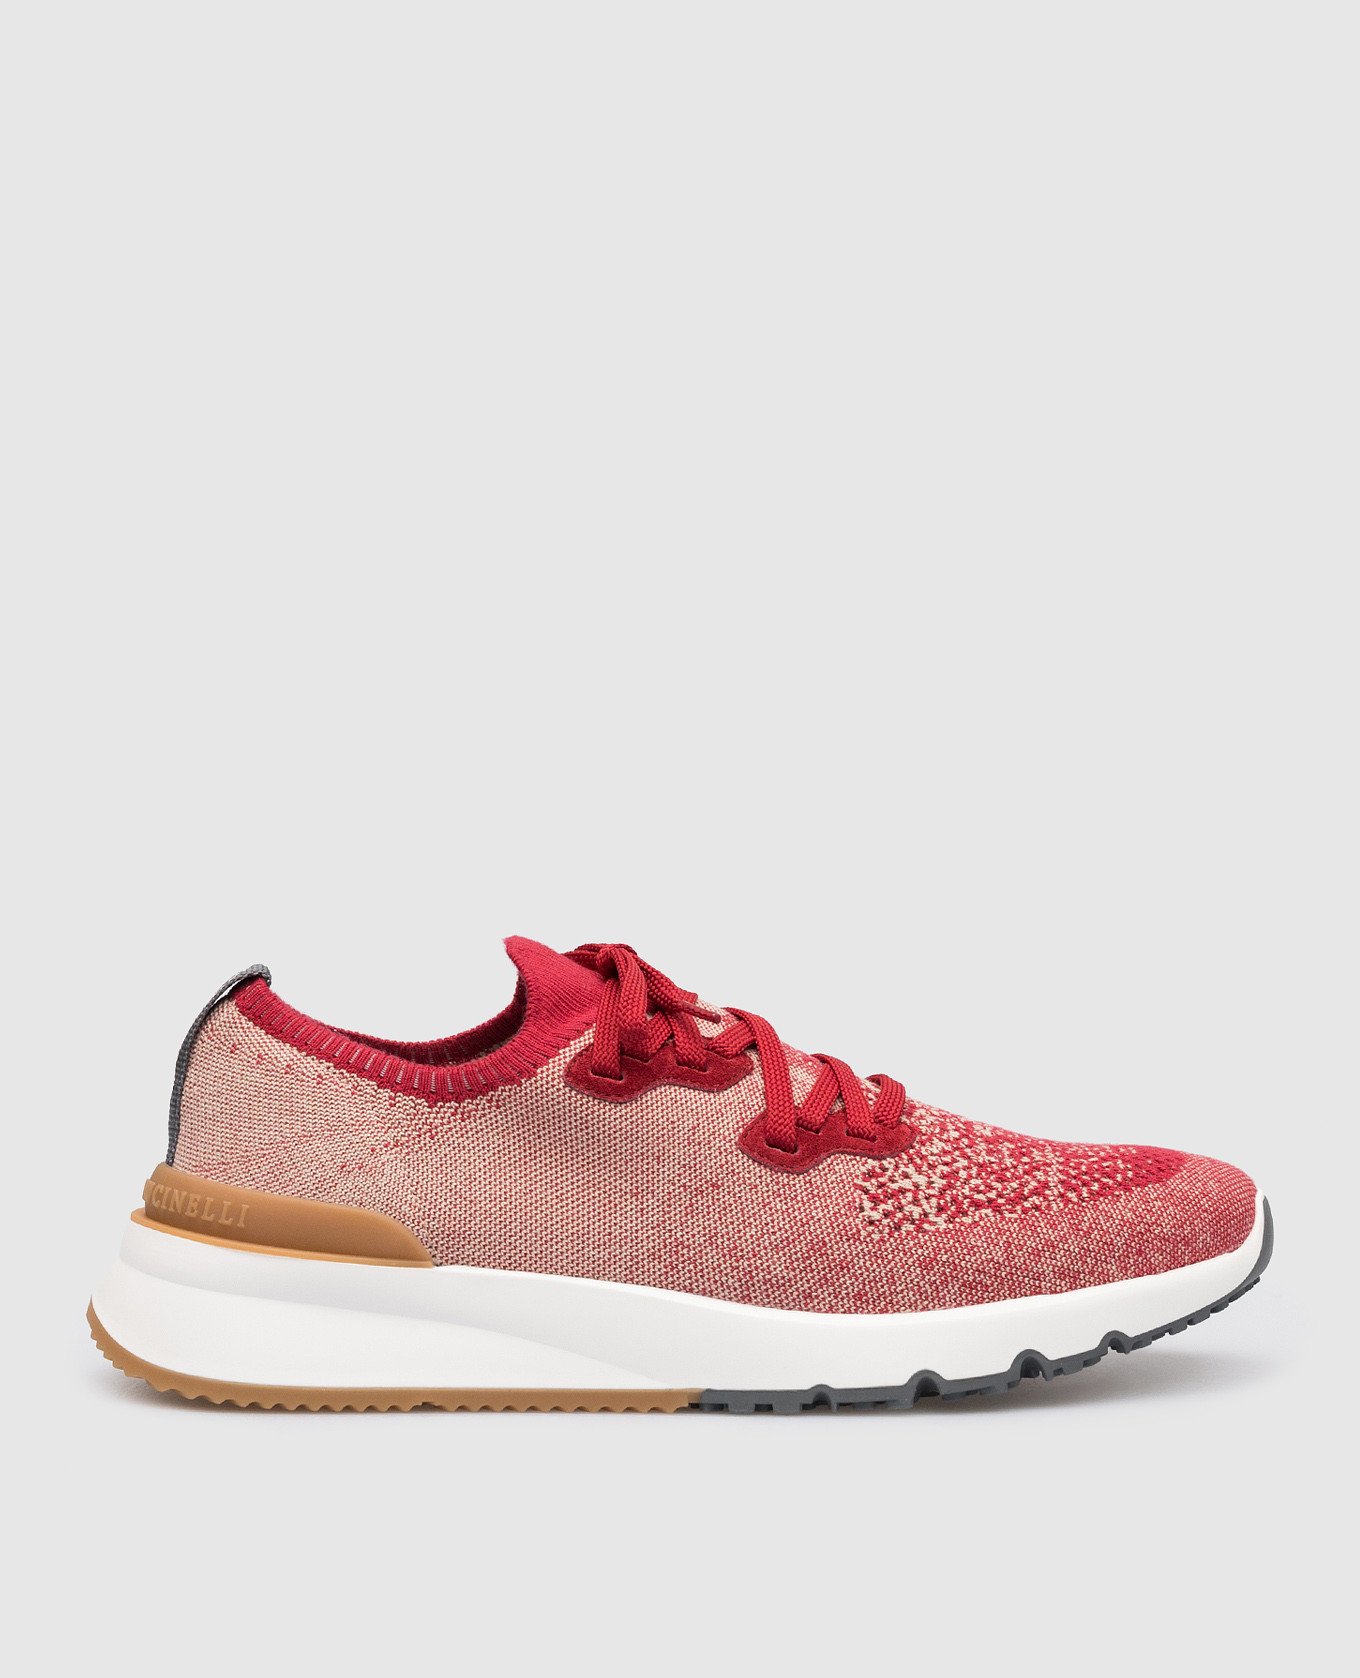 Red sneakers with a textured logo